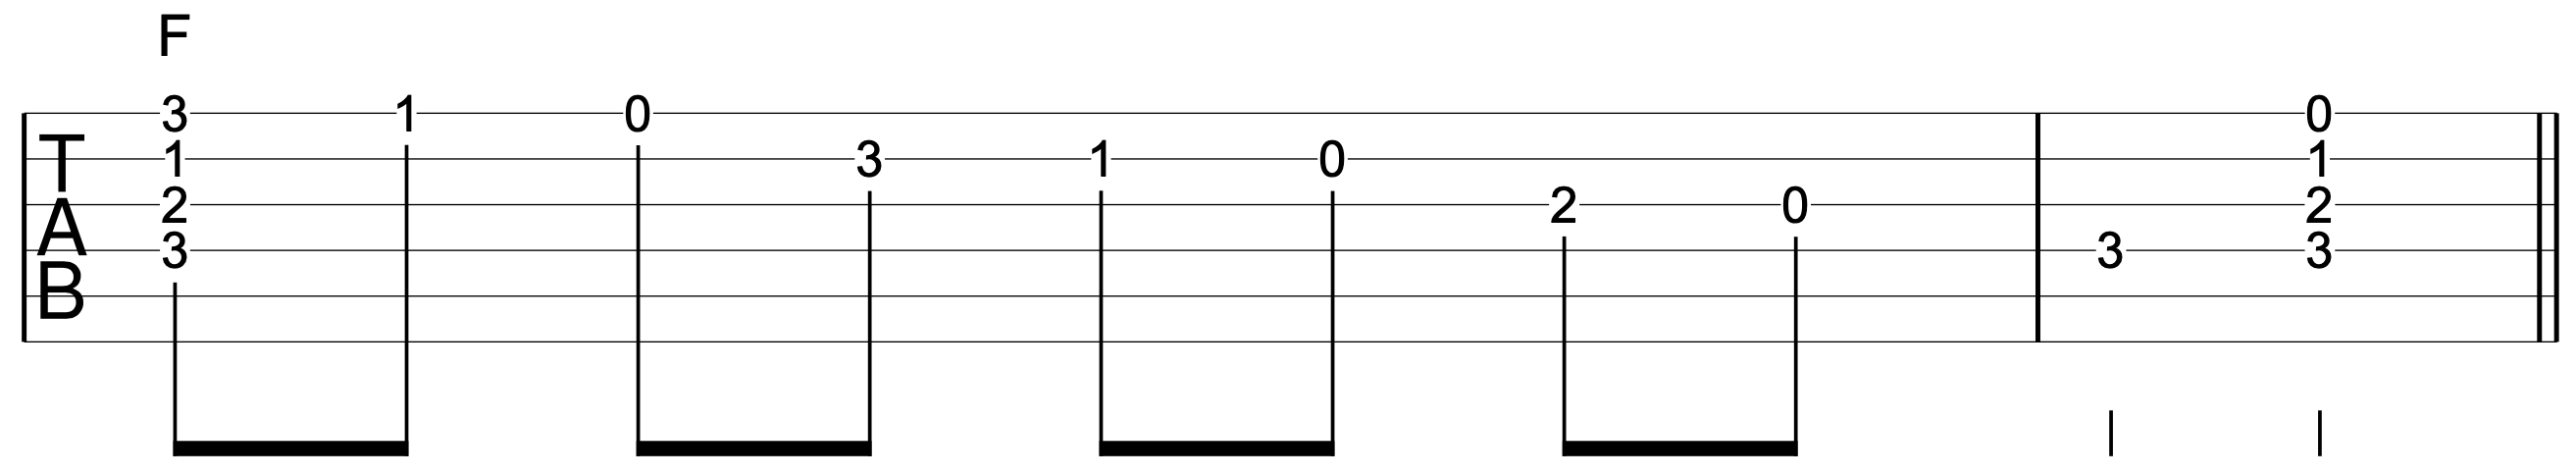 Chord Melody Guitar Exercise F